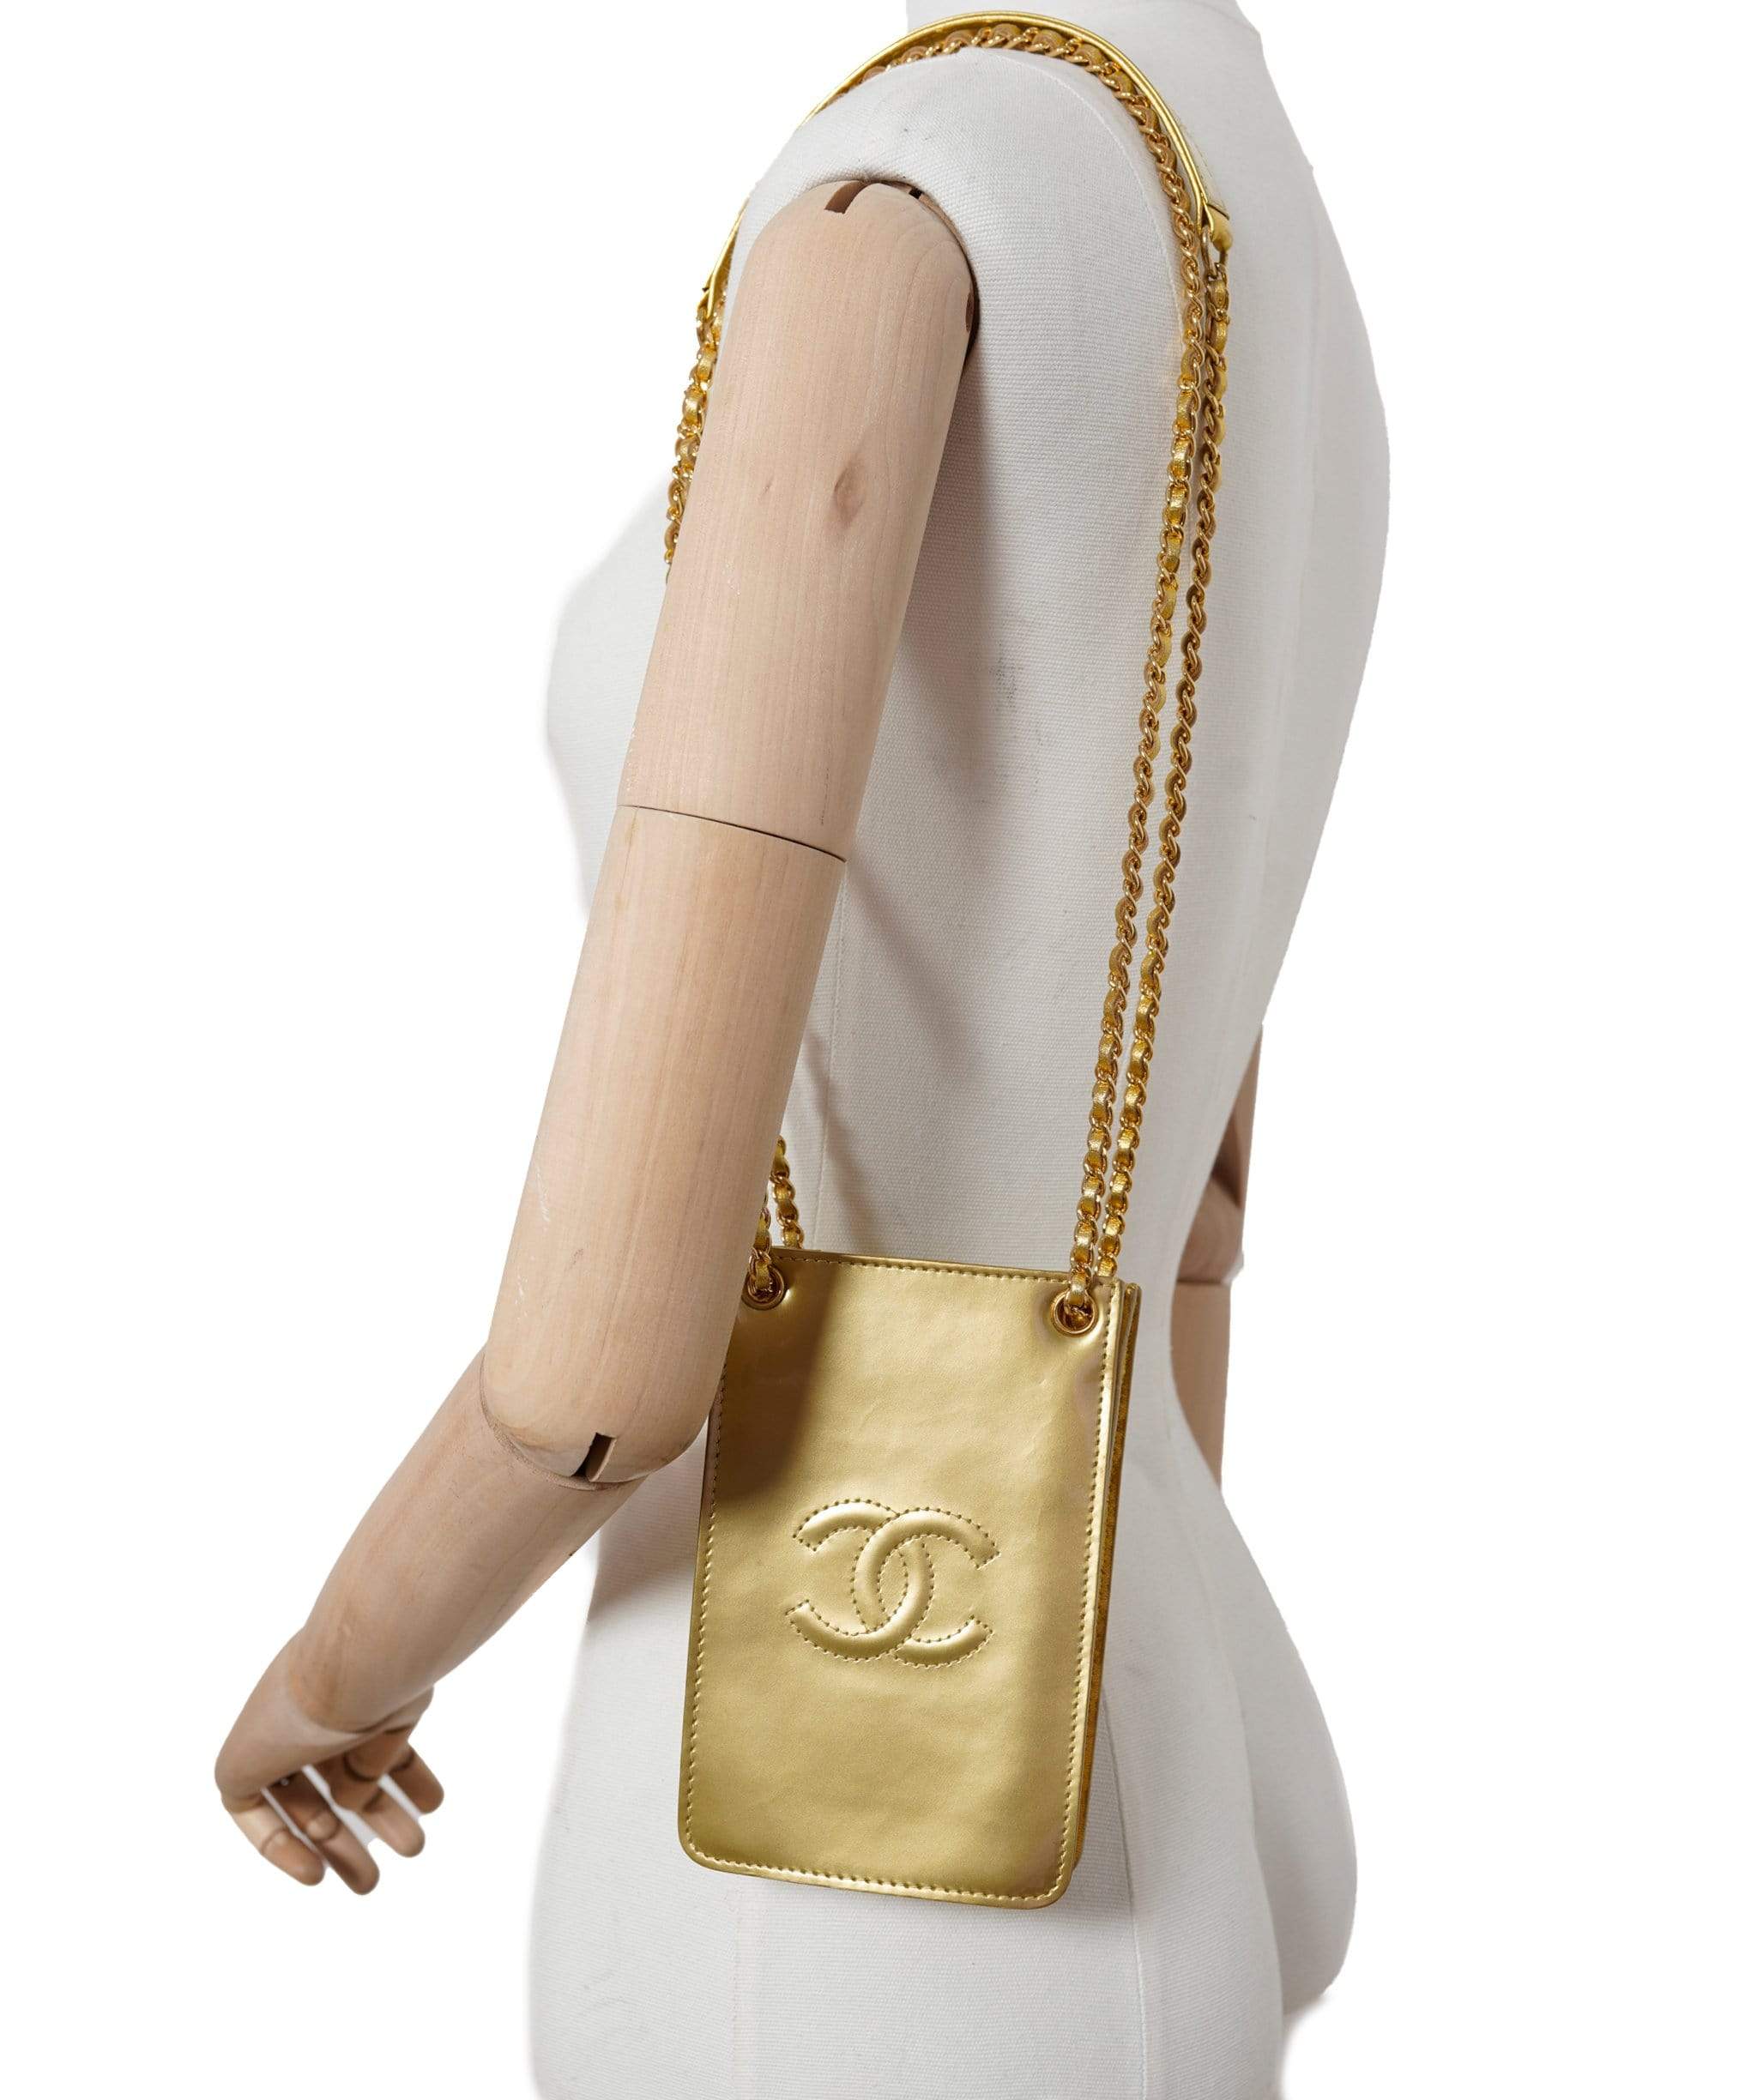 Chanel Chanel CC Gold Phone Case and Bag - AWL1447